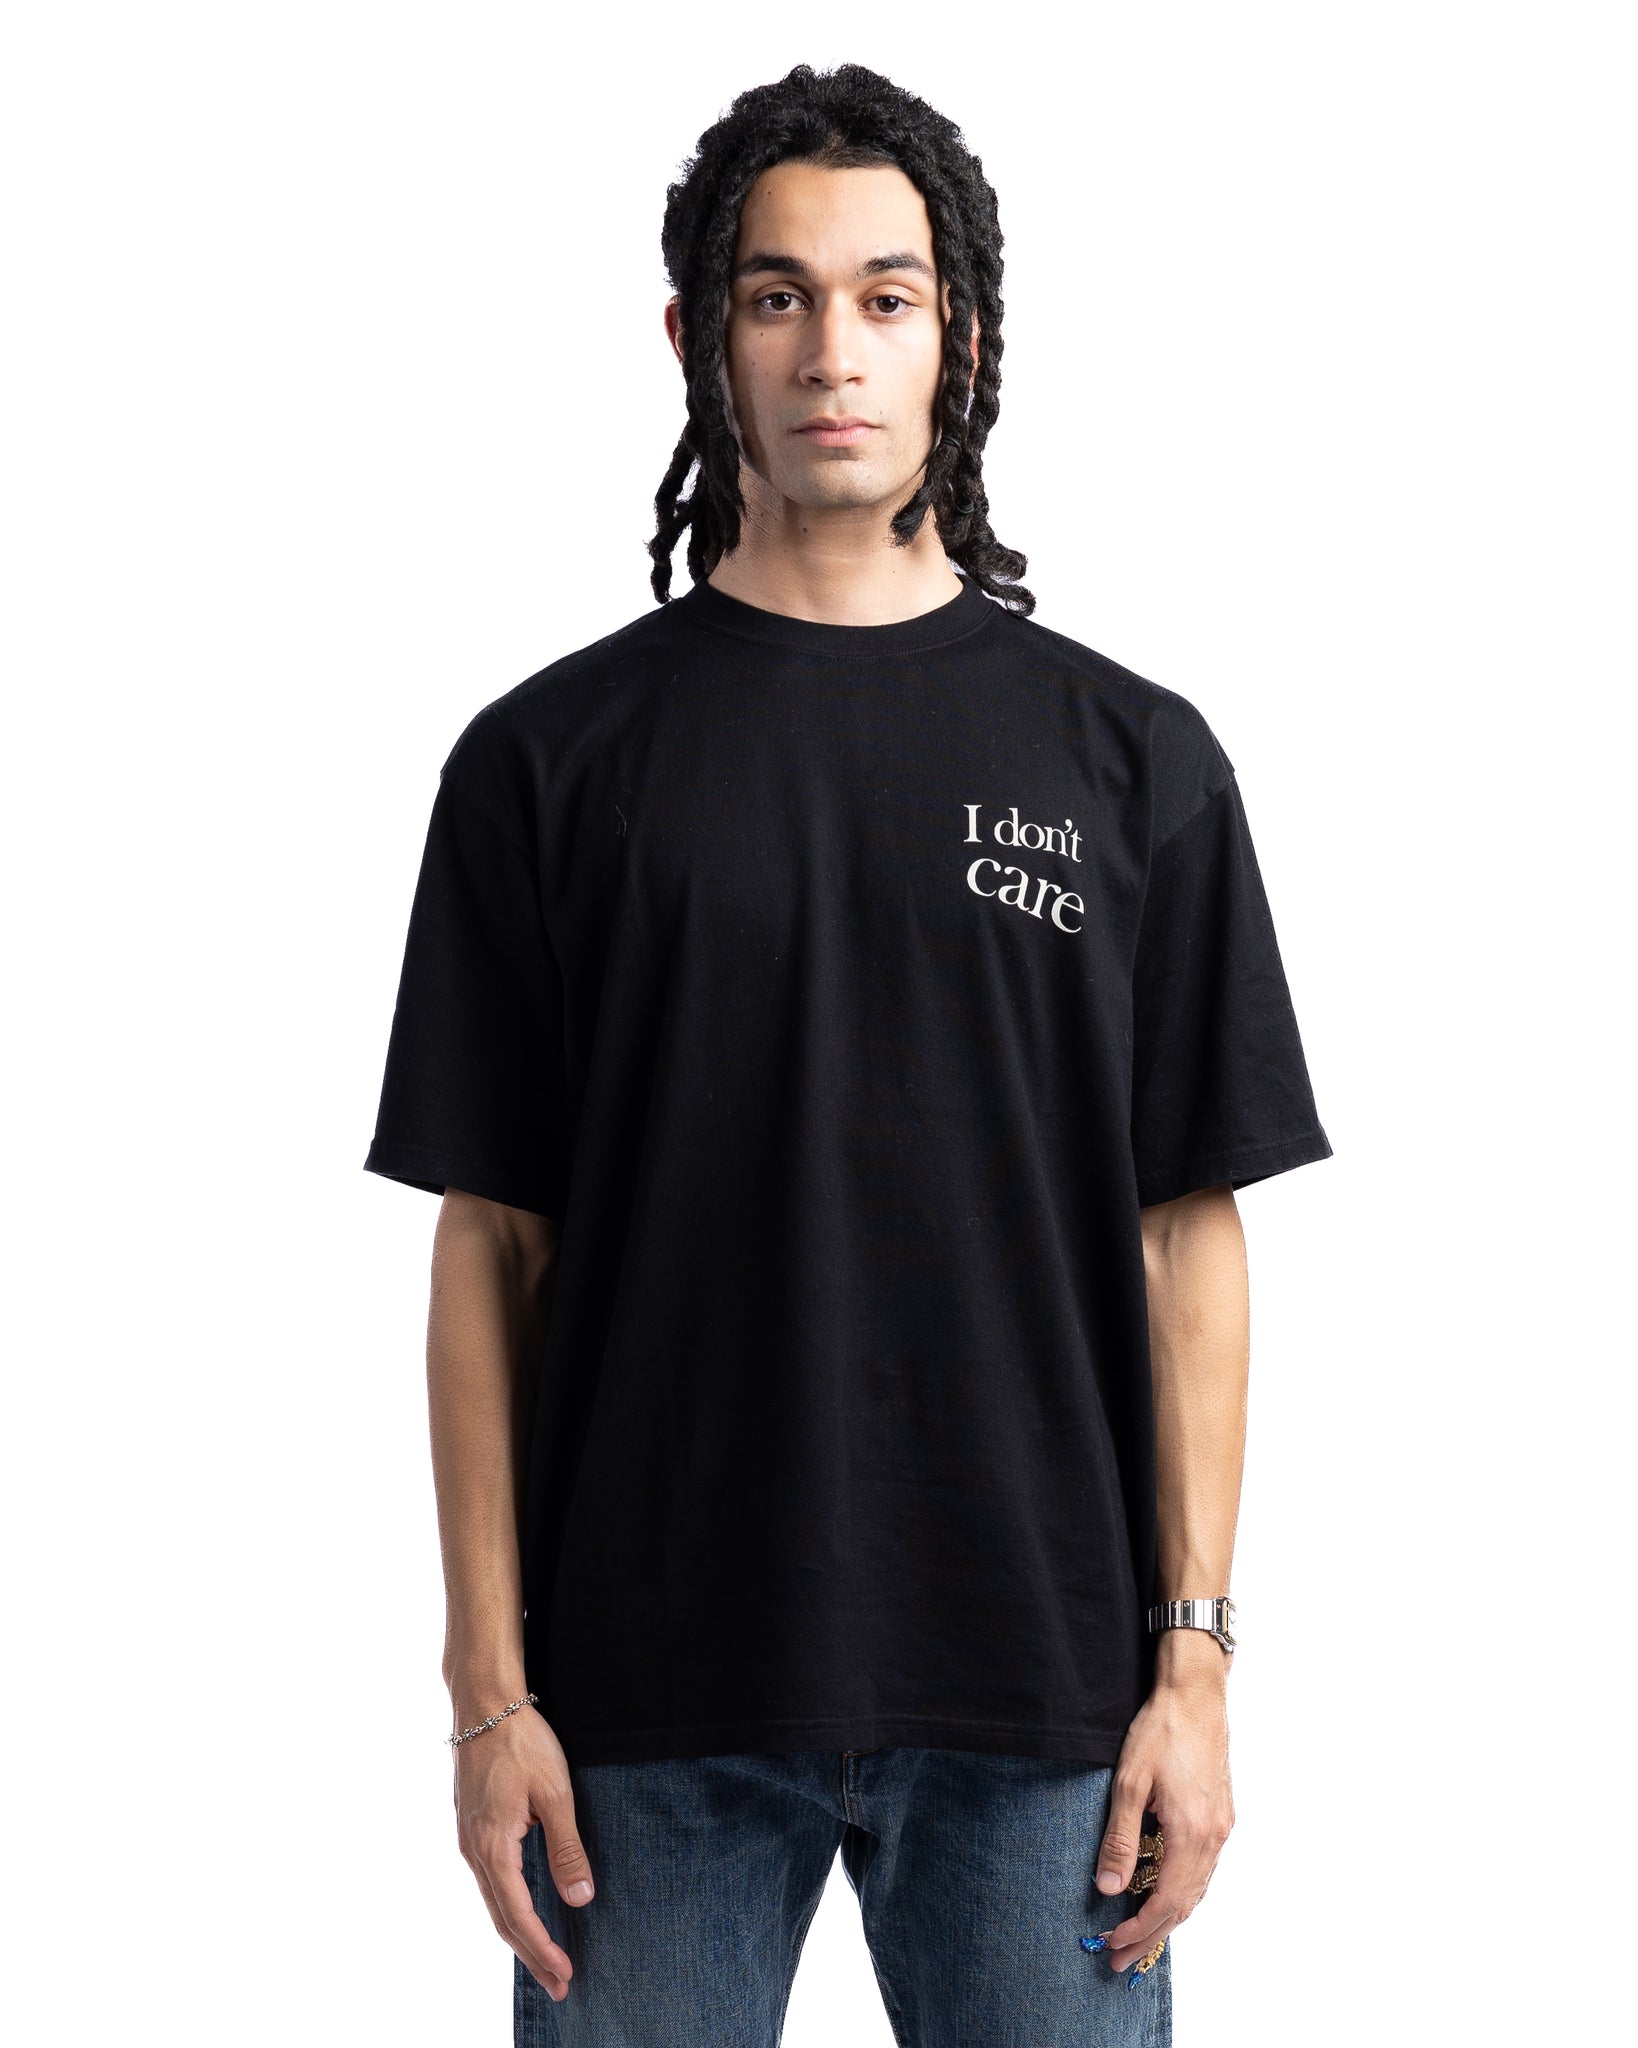 Undercover UC2C3806 I Dont Care Tee Black